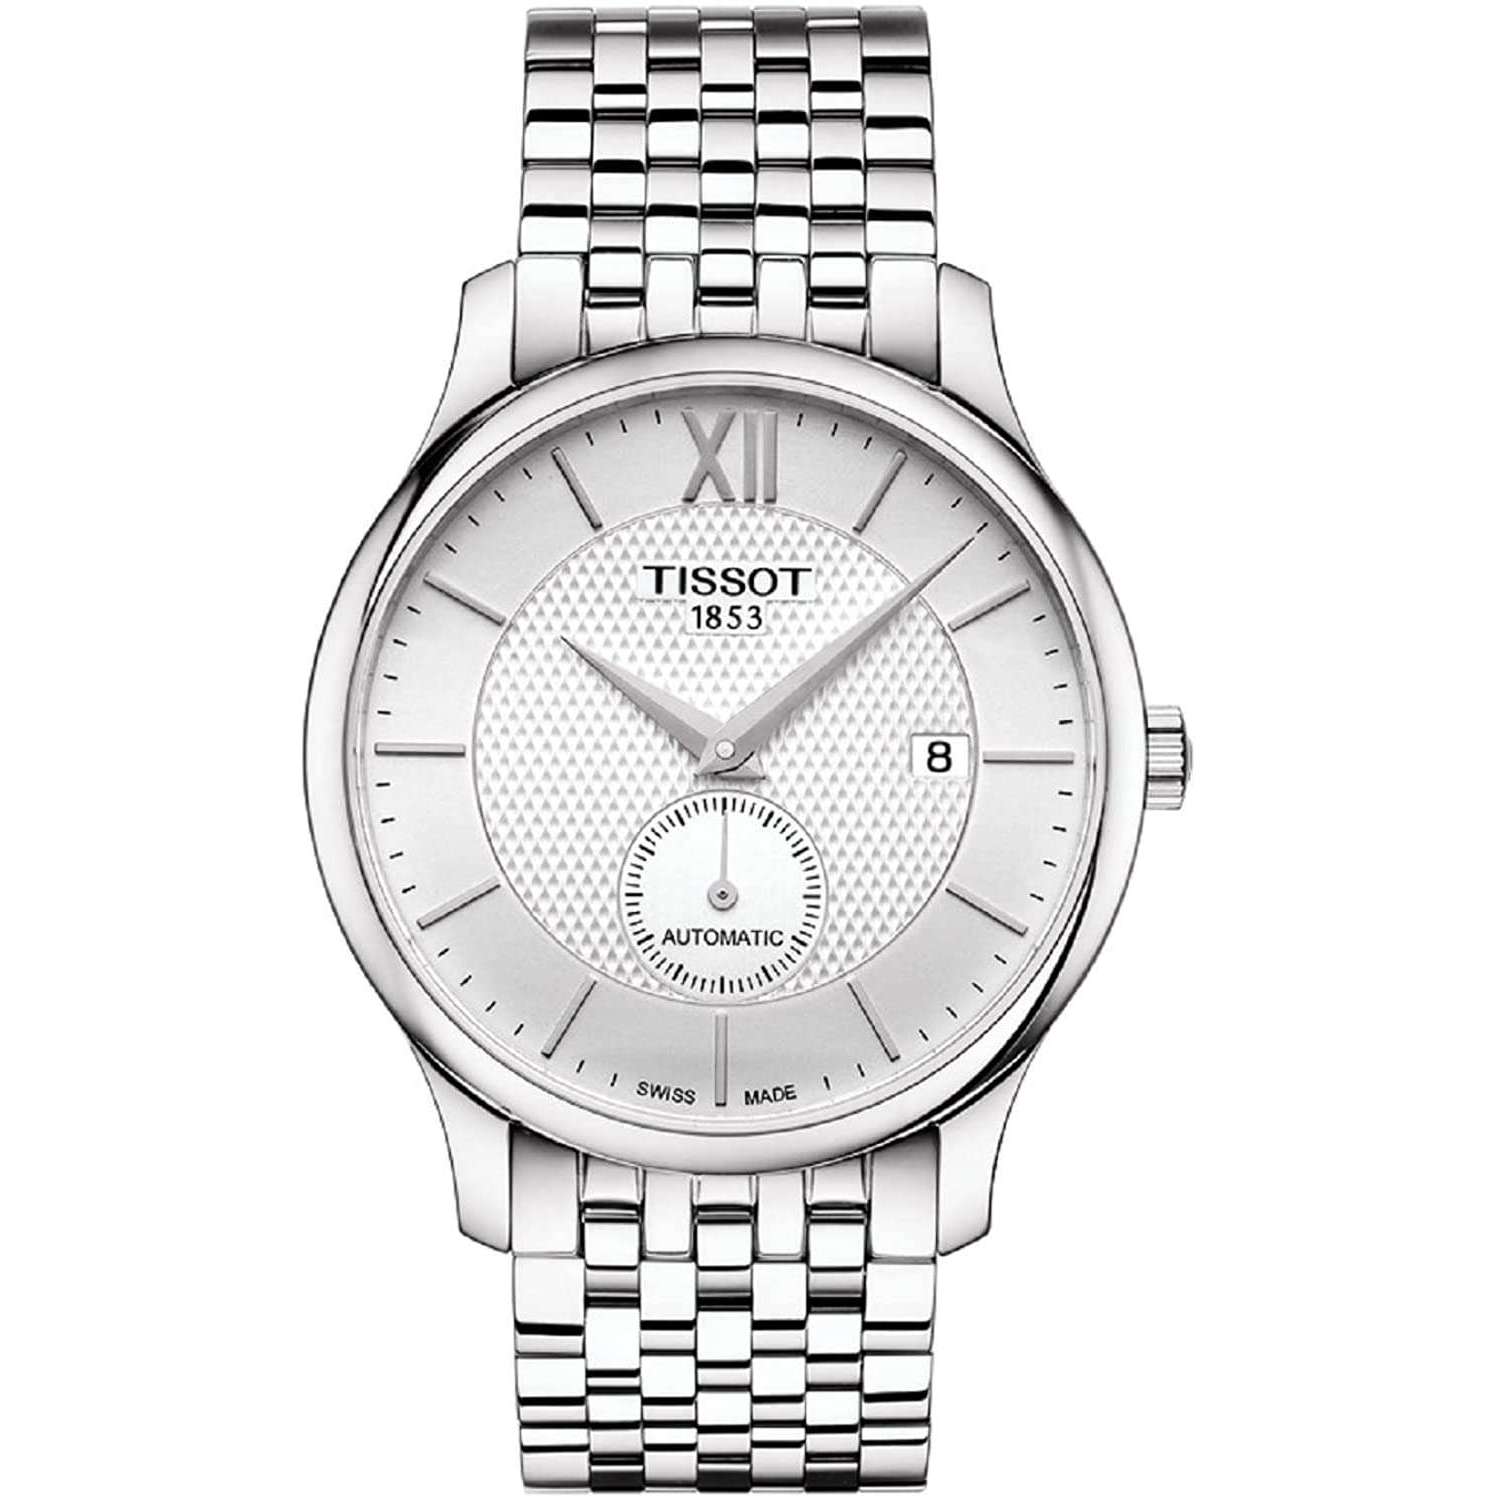 ROOK JAPAN:TISSOT TRADITION AUTOMATIC 40 MM MEN WATCH T0634281103800,Luxury Watch,Tissot Tradition